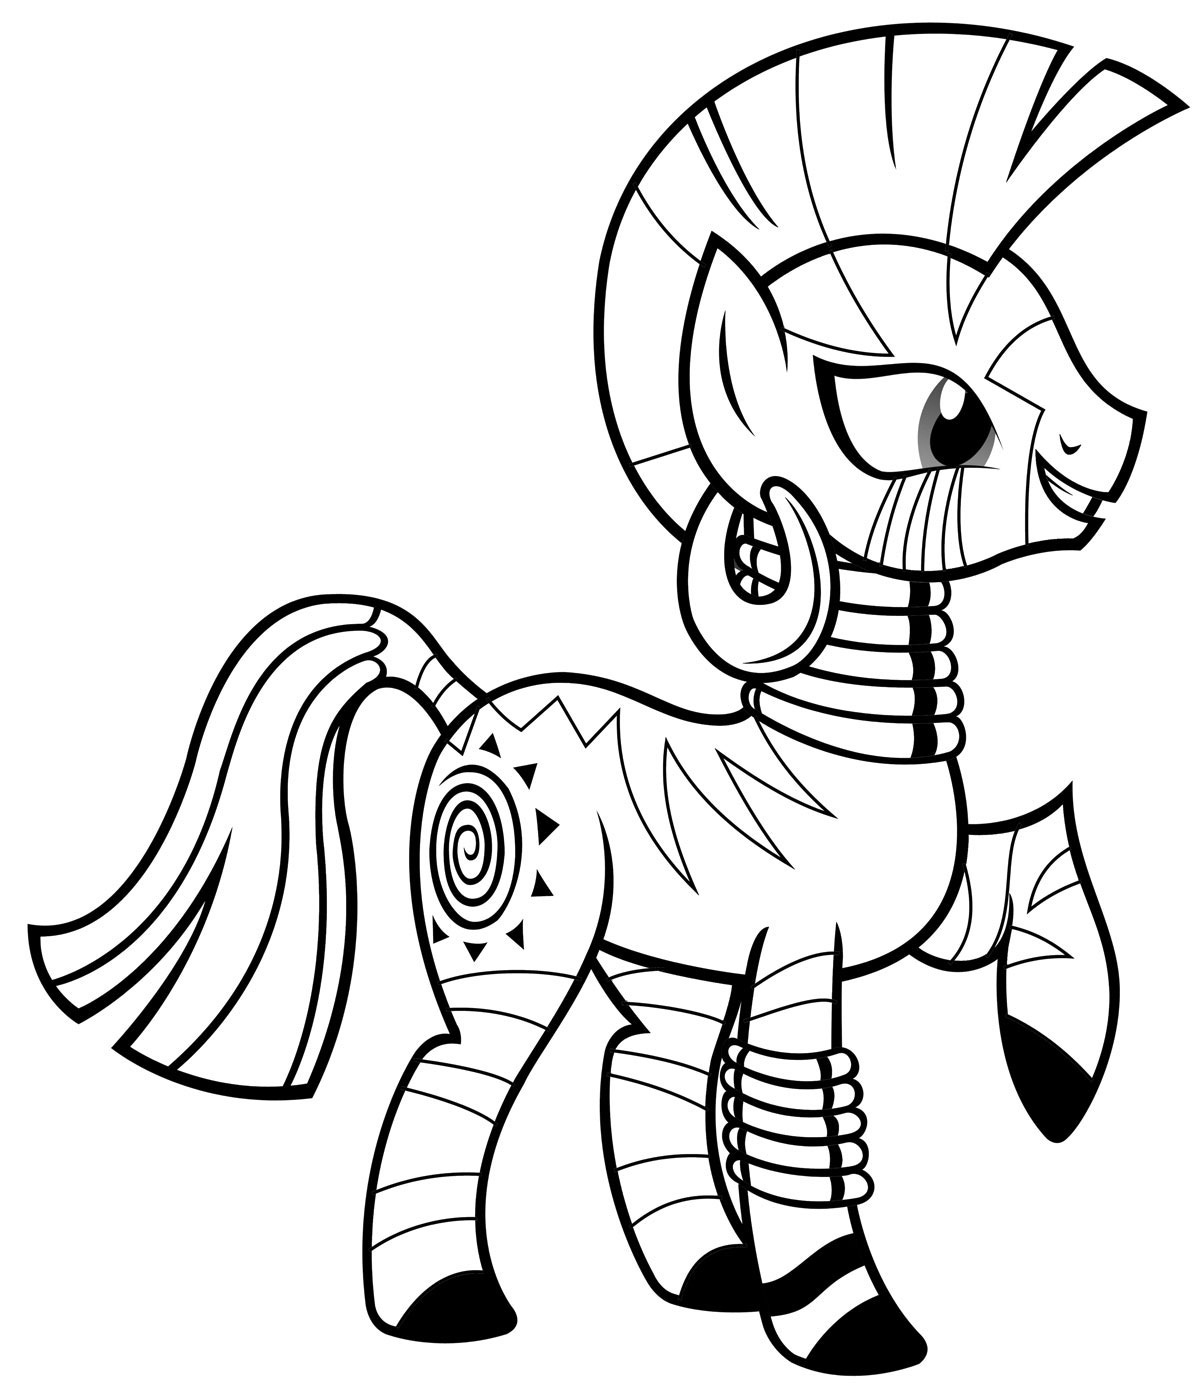 Free Printable My Little Pony Coloring Pages For Kids ...